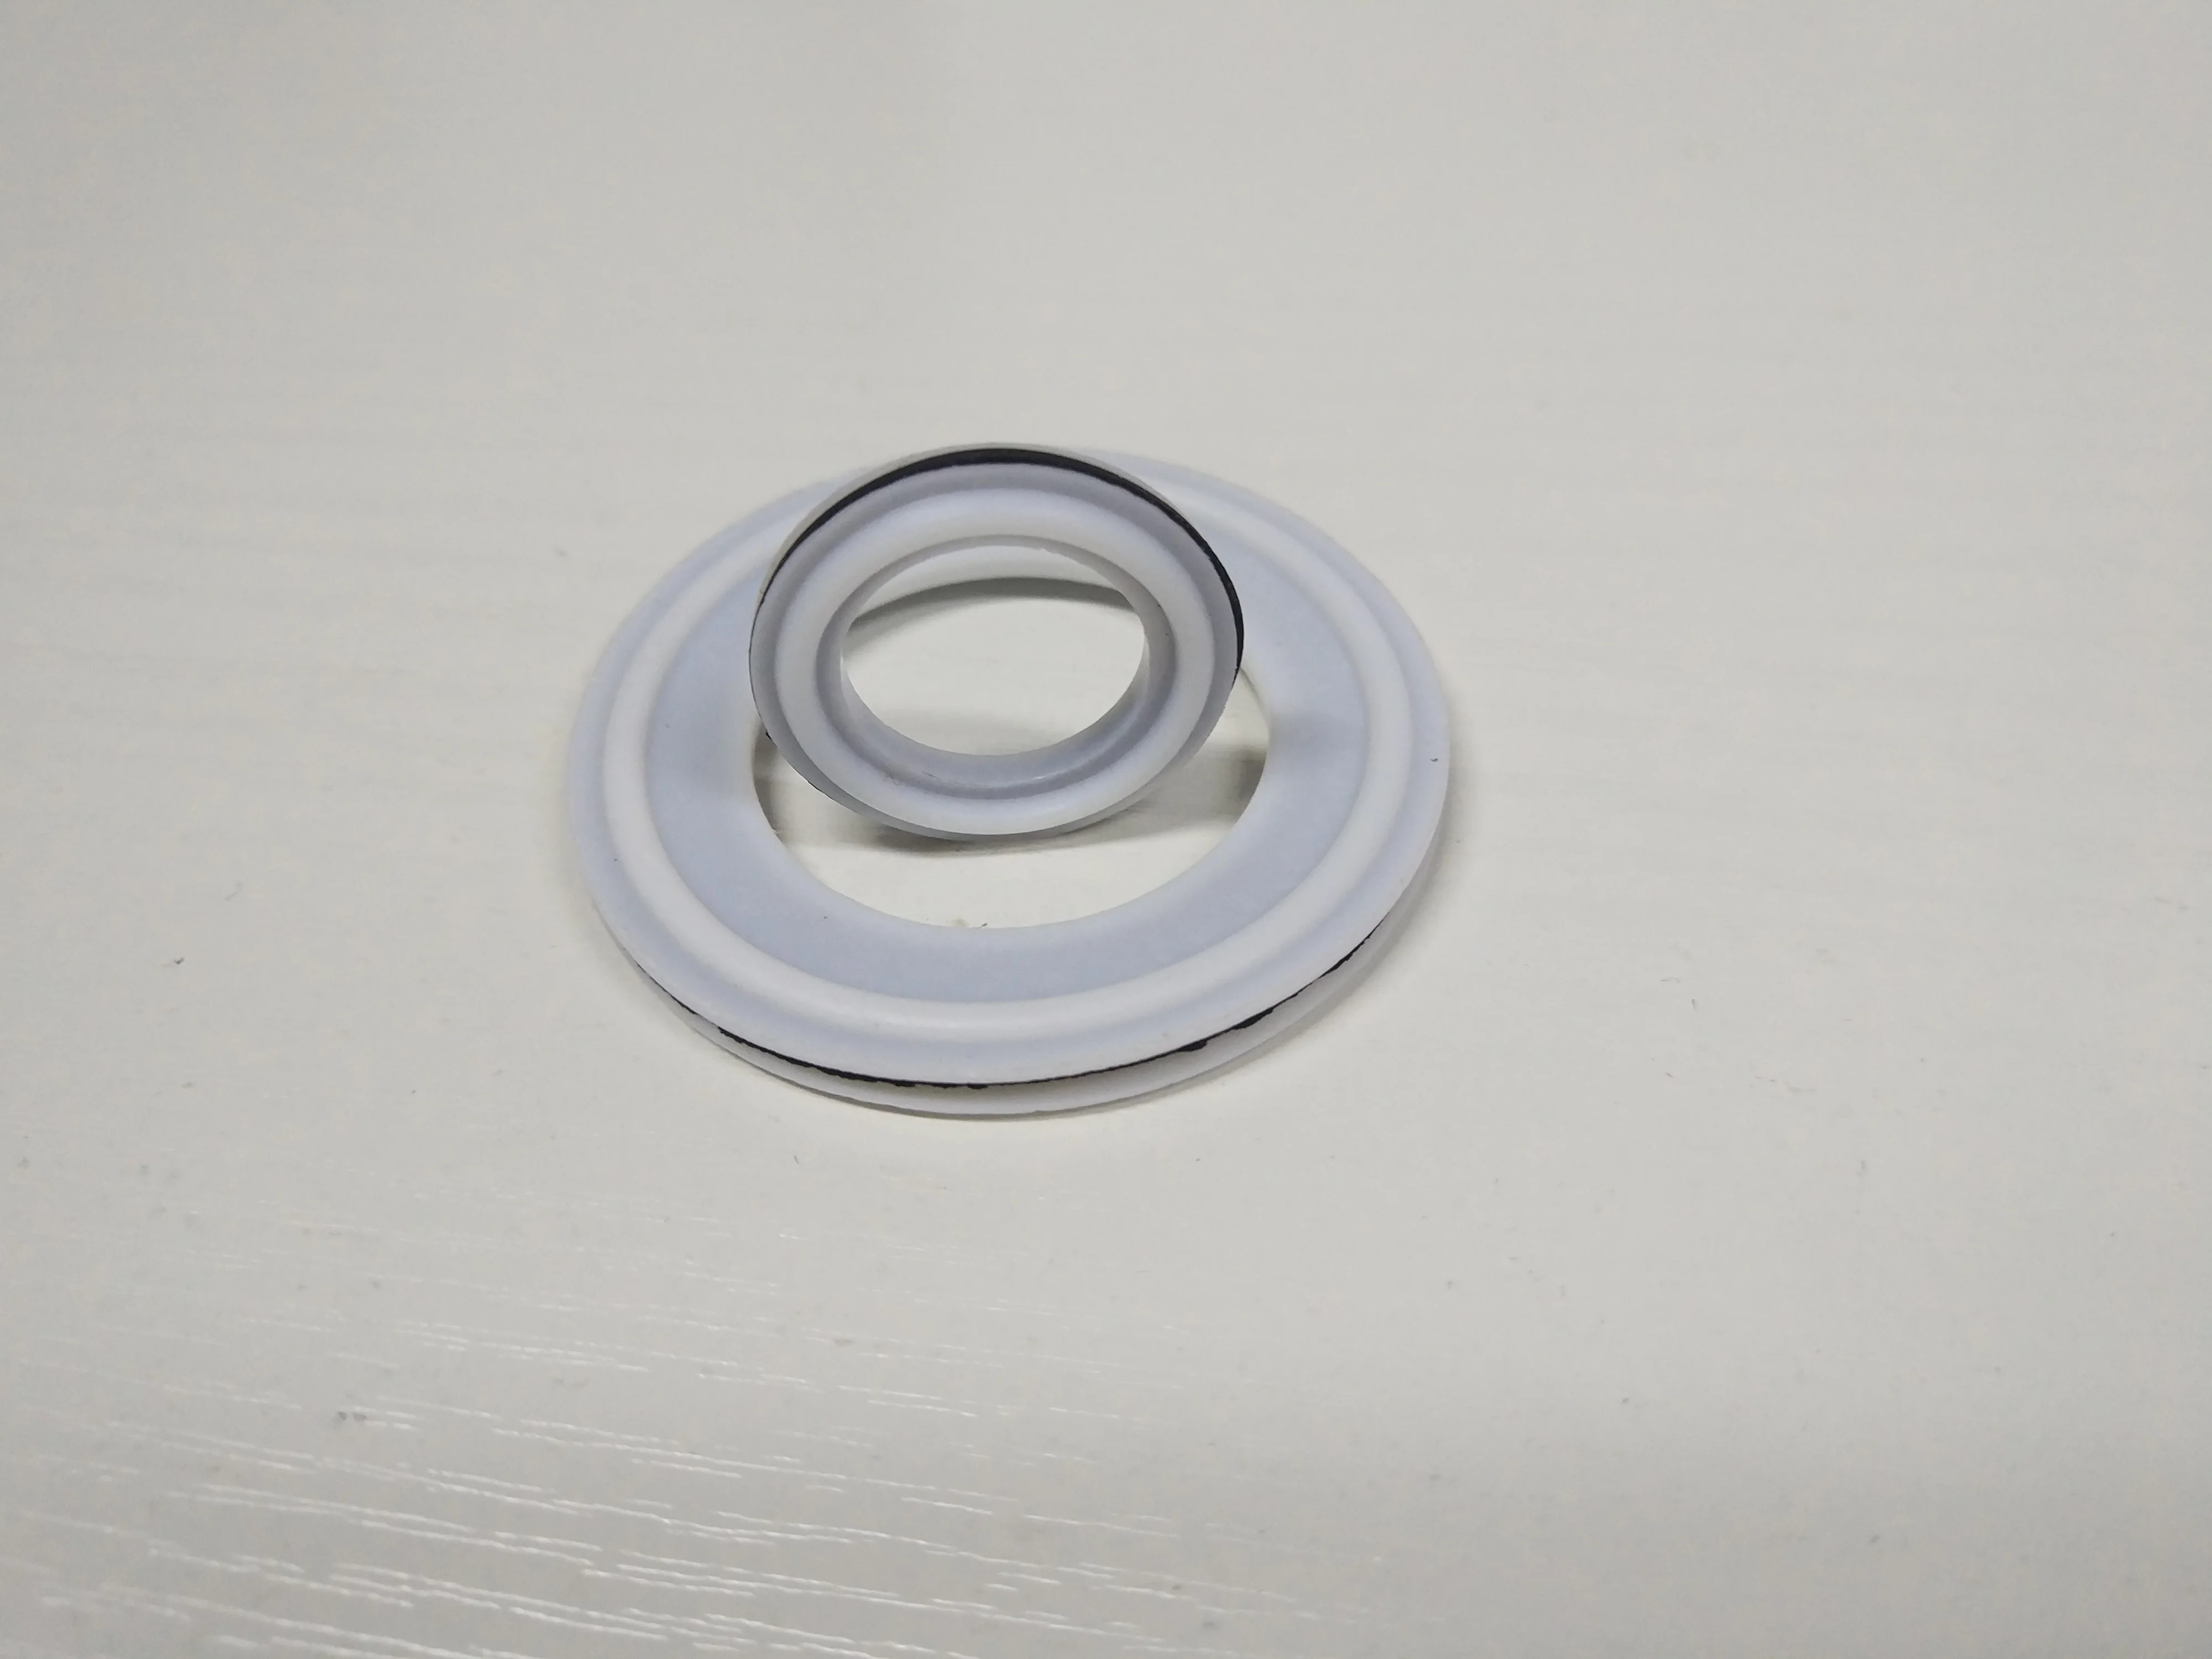 
sanitary silicone pipe triclamp gaskets gaskets rubber 